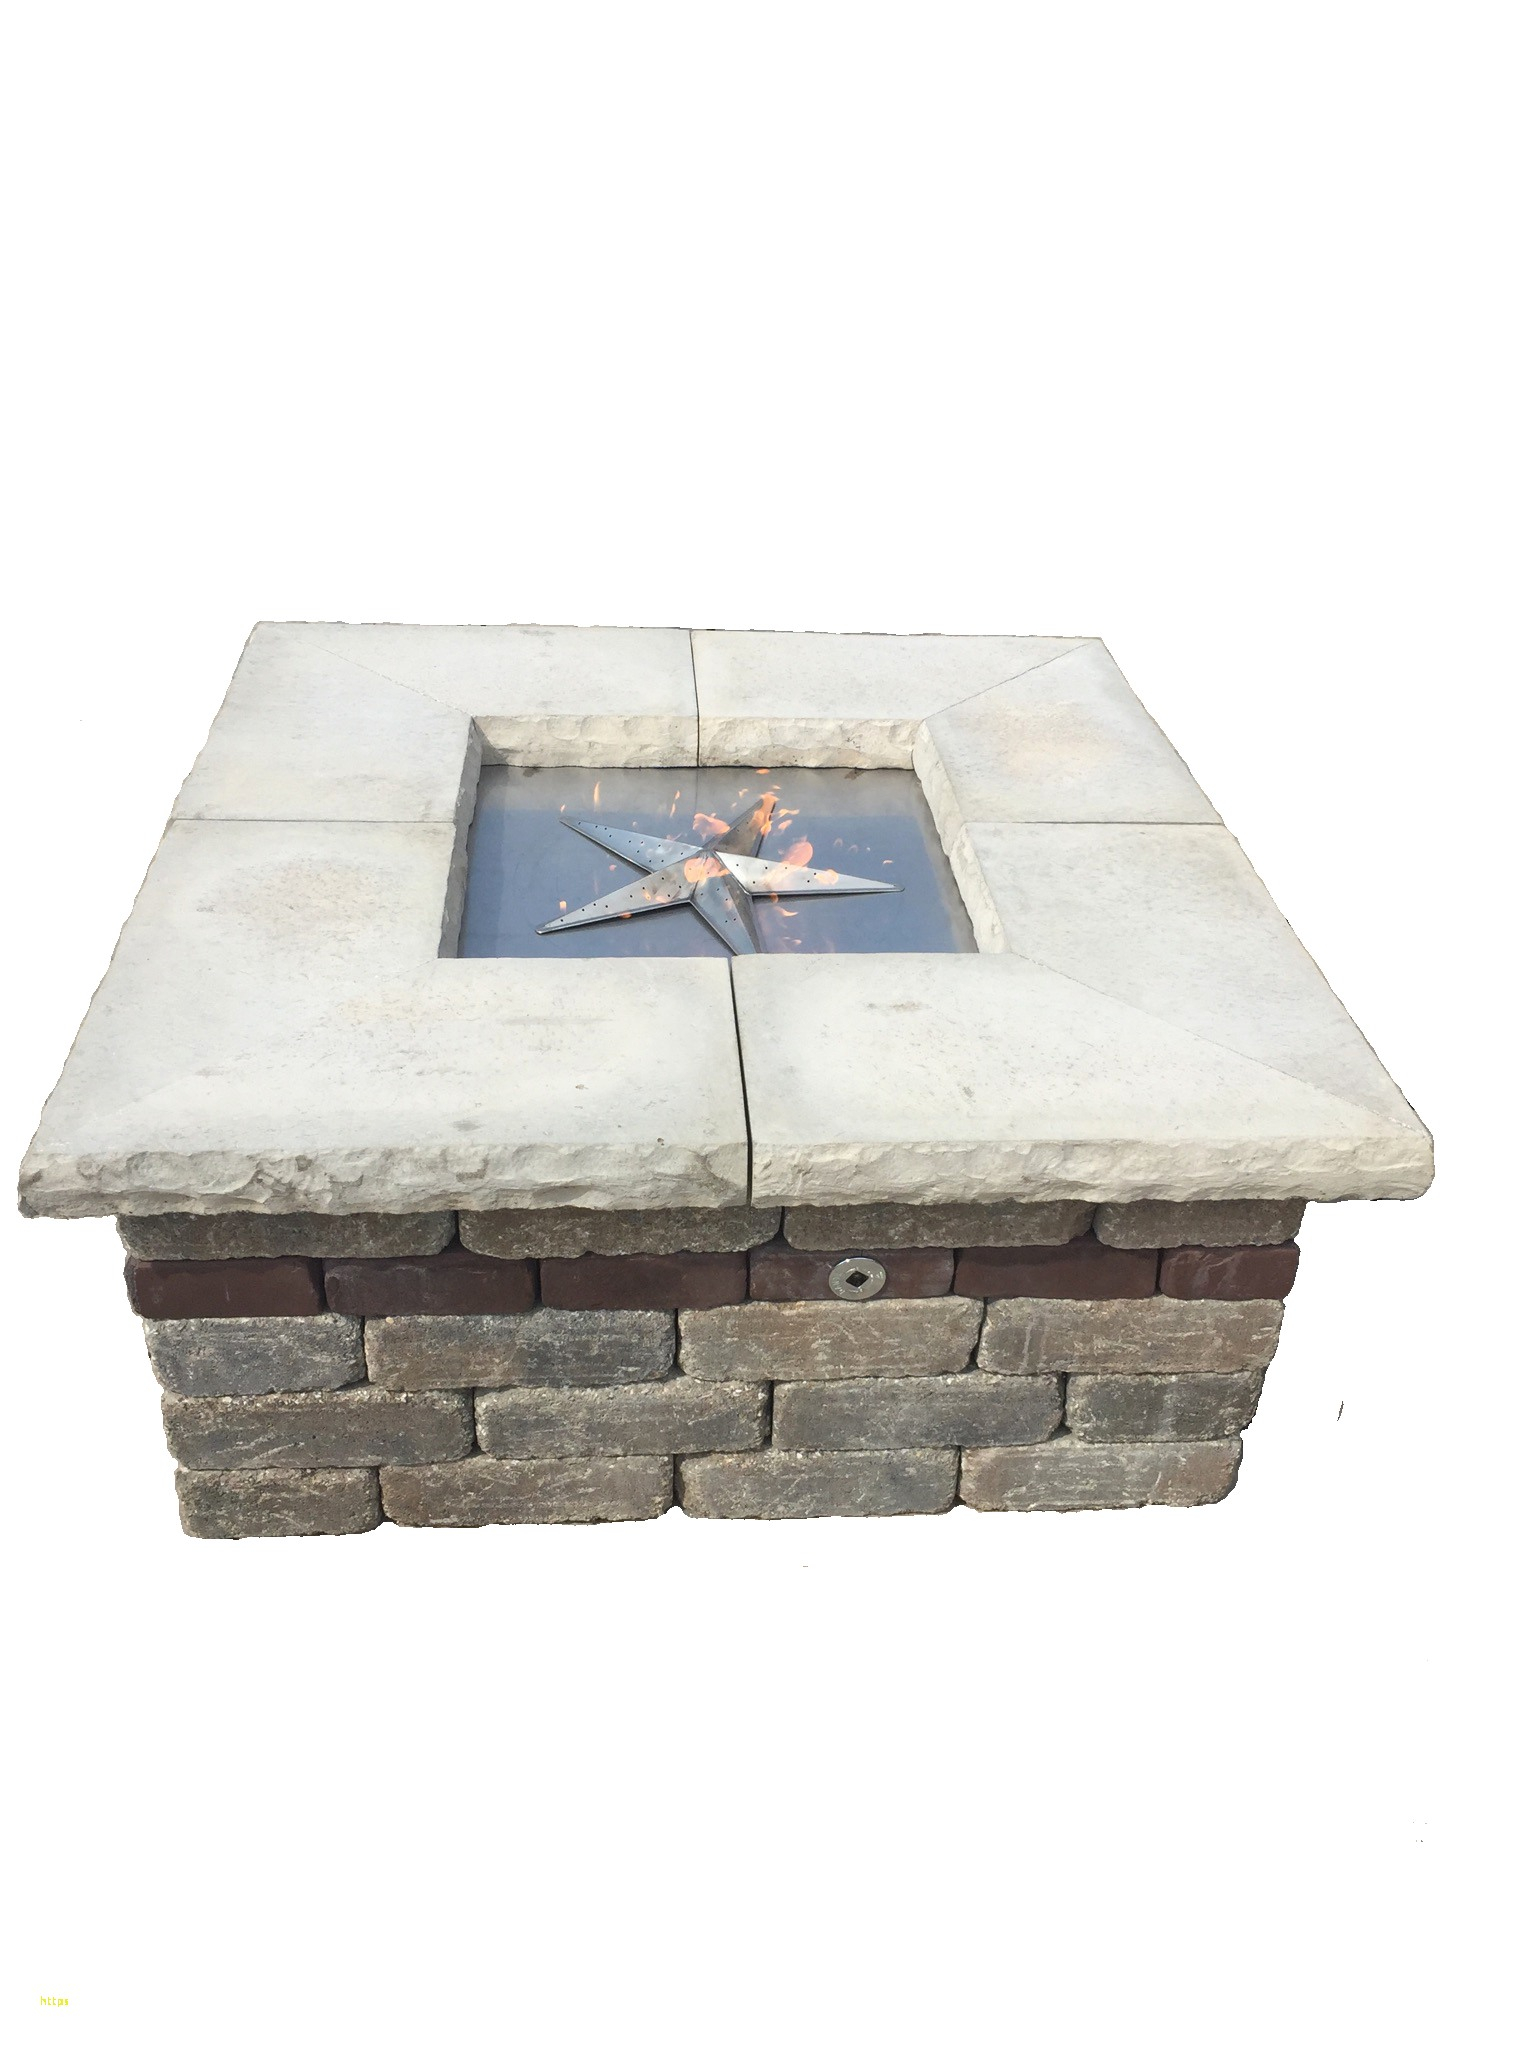 43 Fresh 24 Inch Square Fire Pit Insert Fire Pit Creation with proportions 1536 X 2048